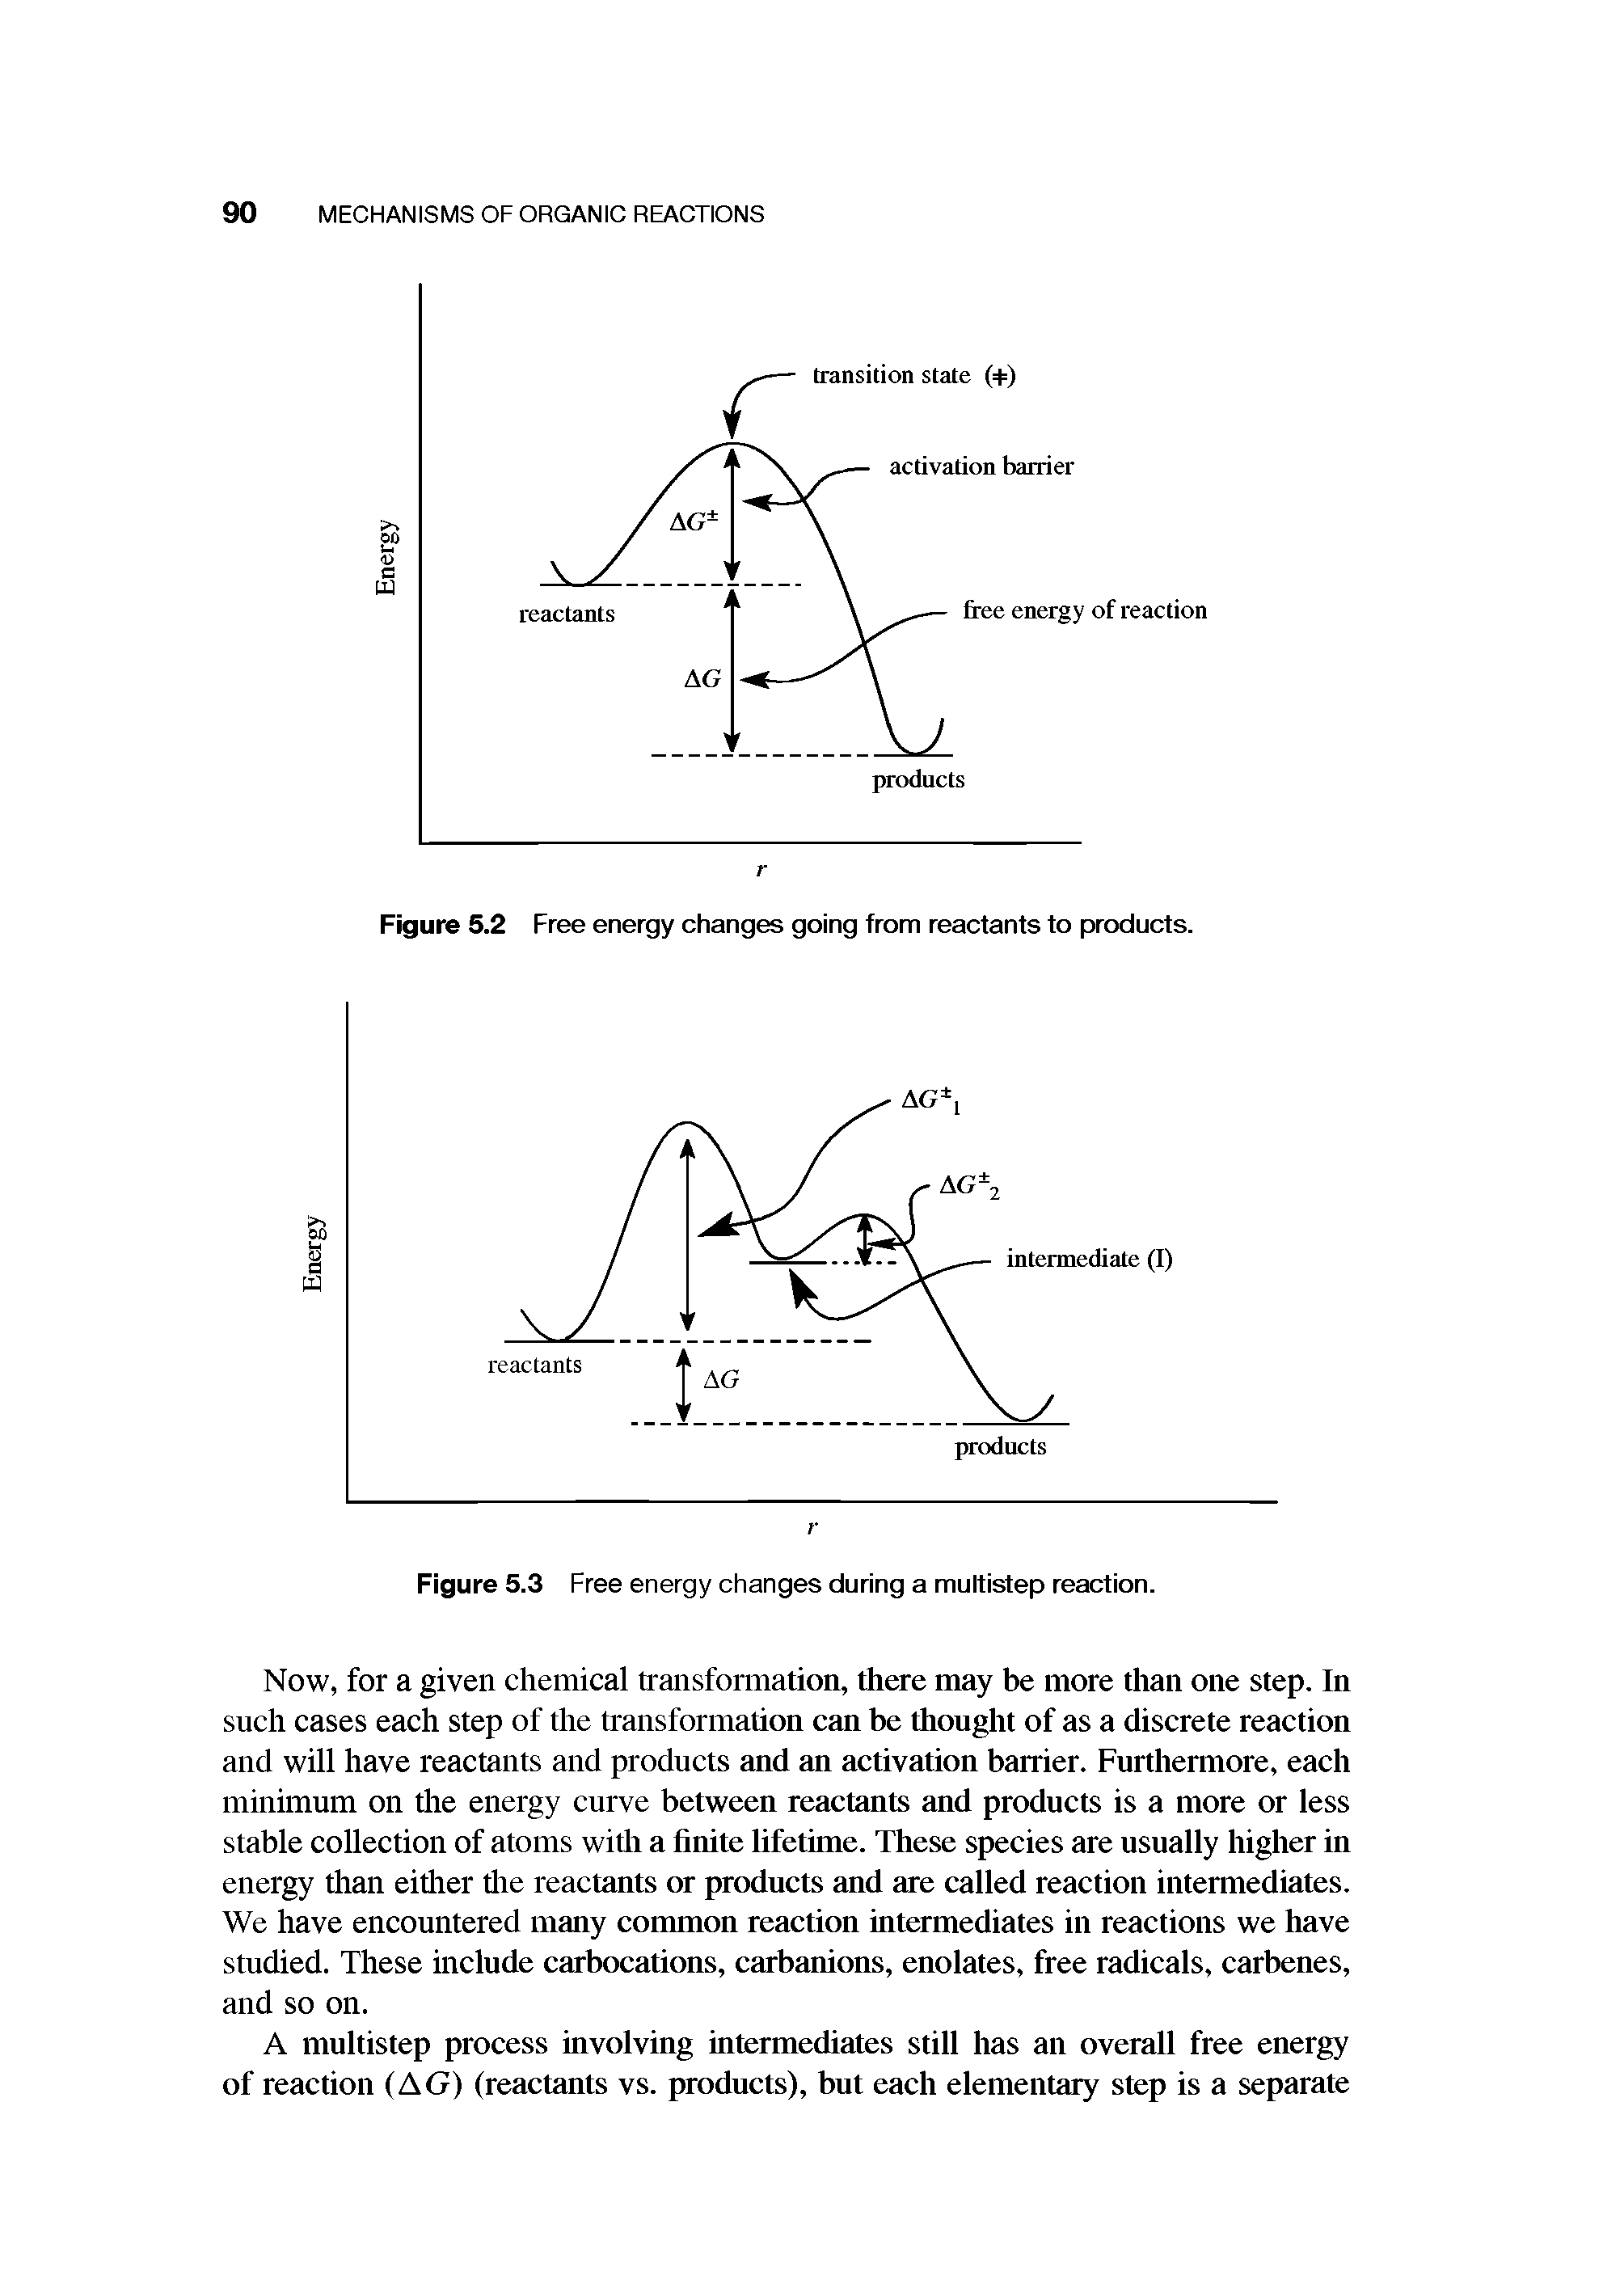 Figure 5.3 Free energy changes during a multistep reaction.